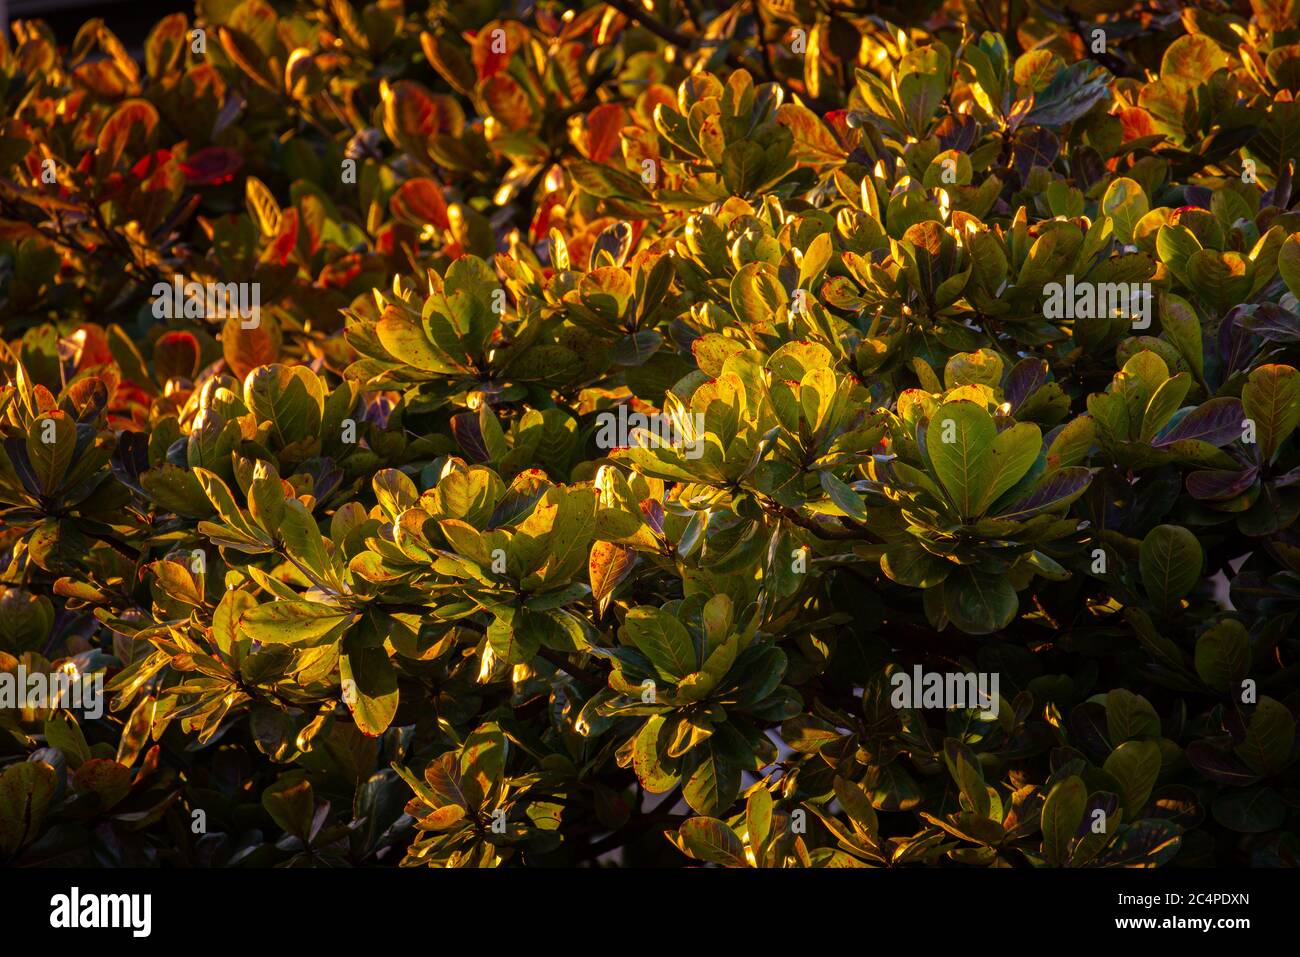 Warm sunset light shining on the leaves of a beach almond tree. Stock Photo